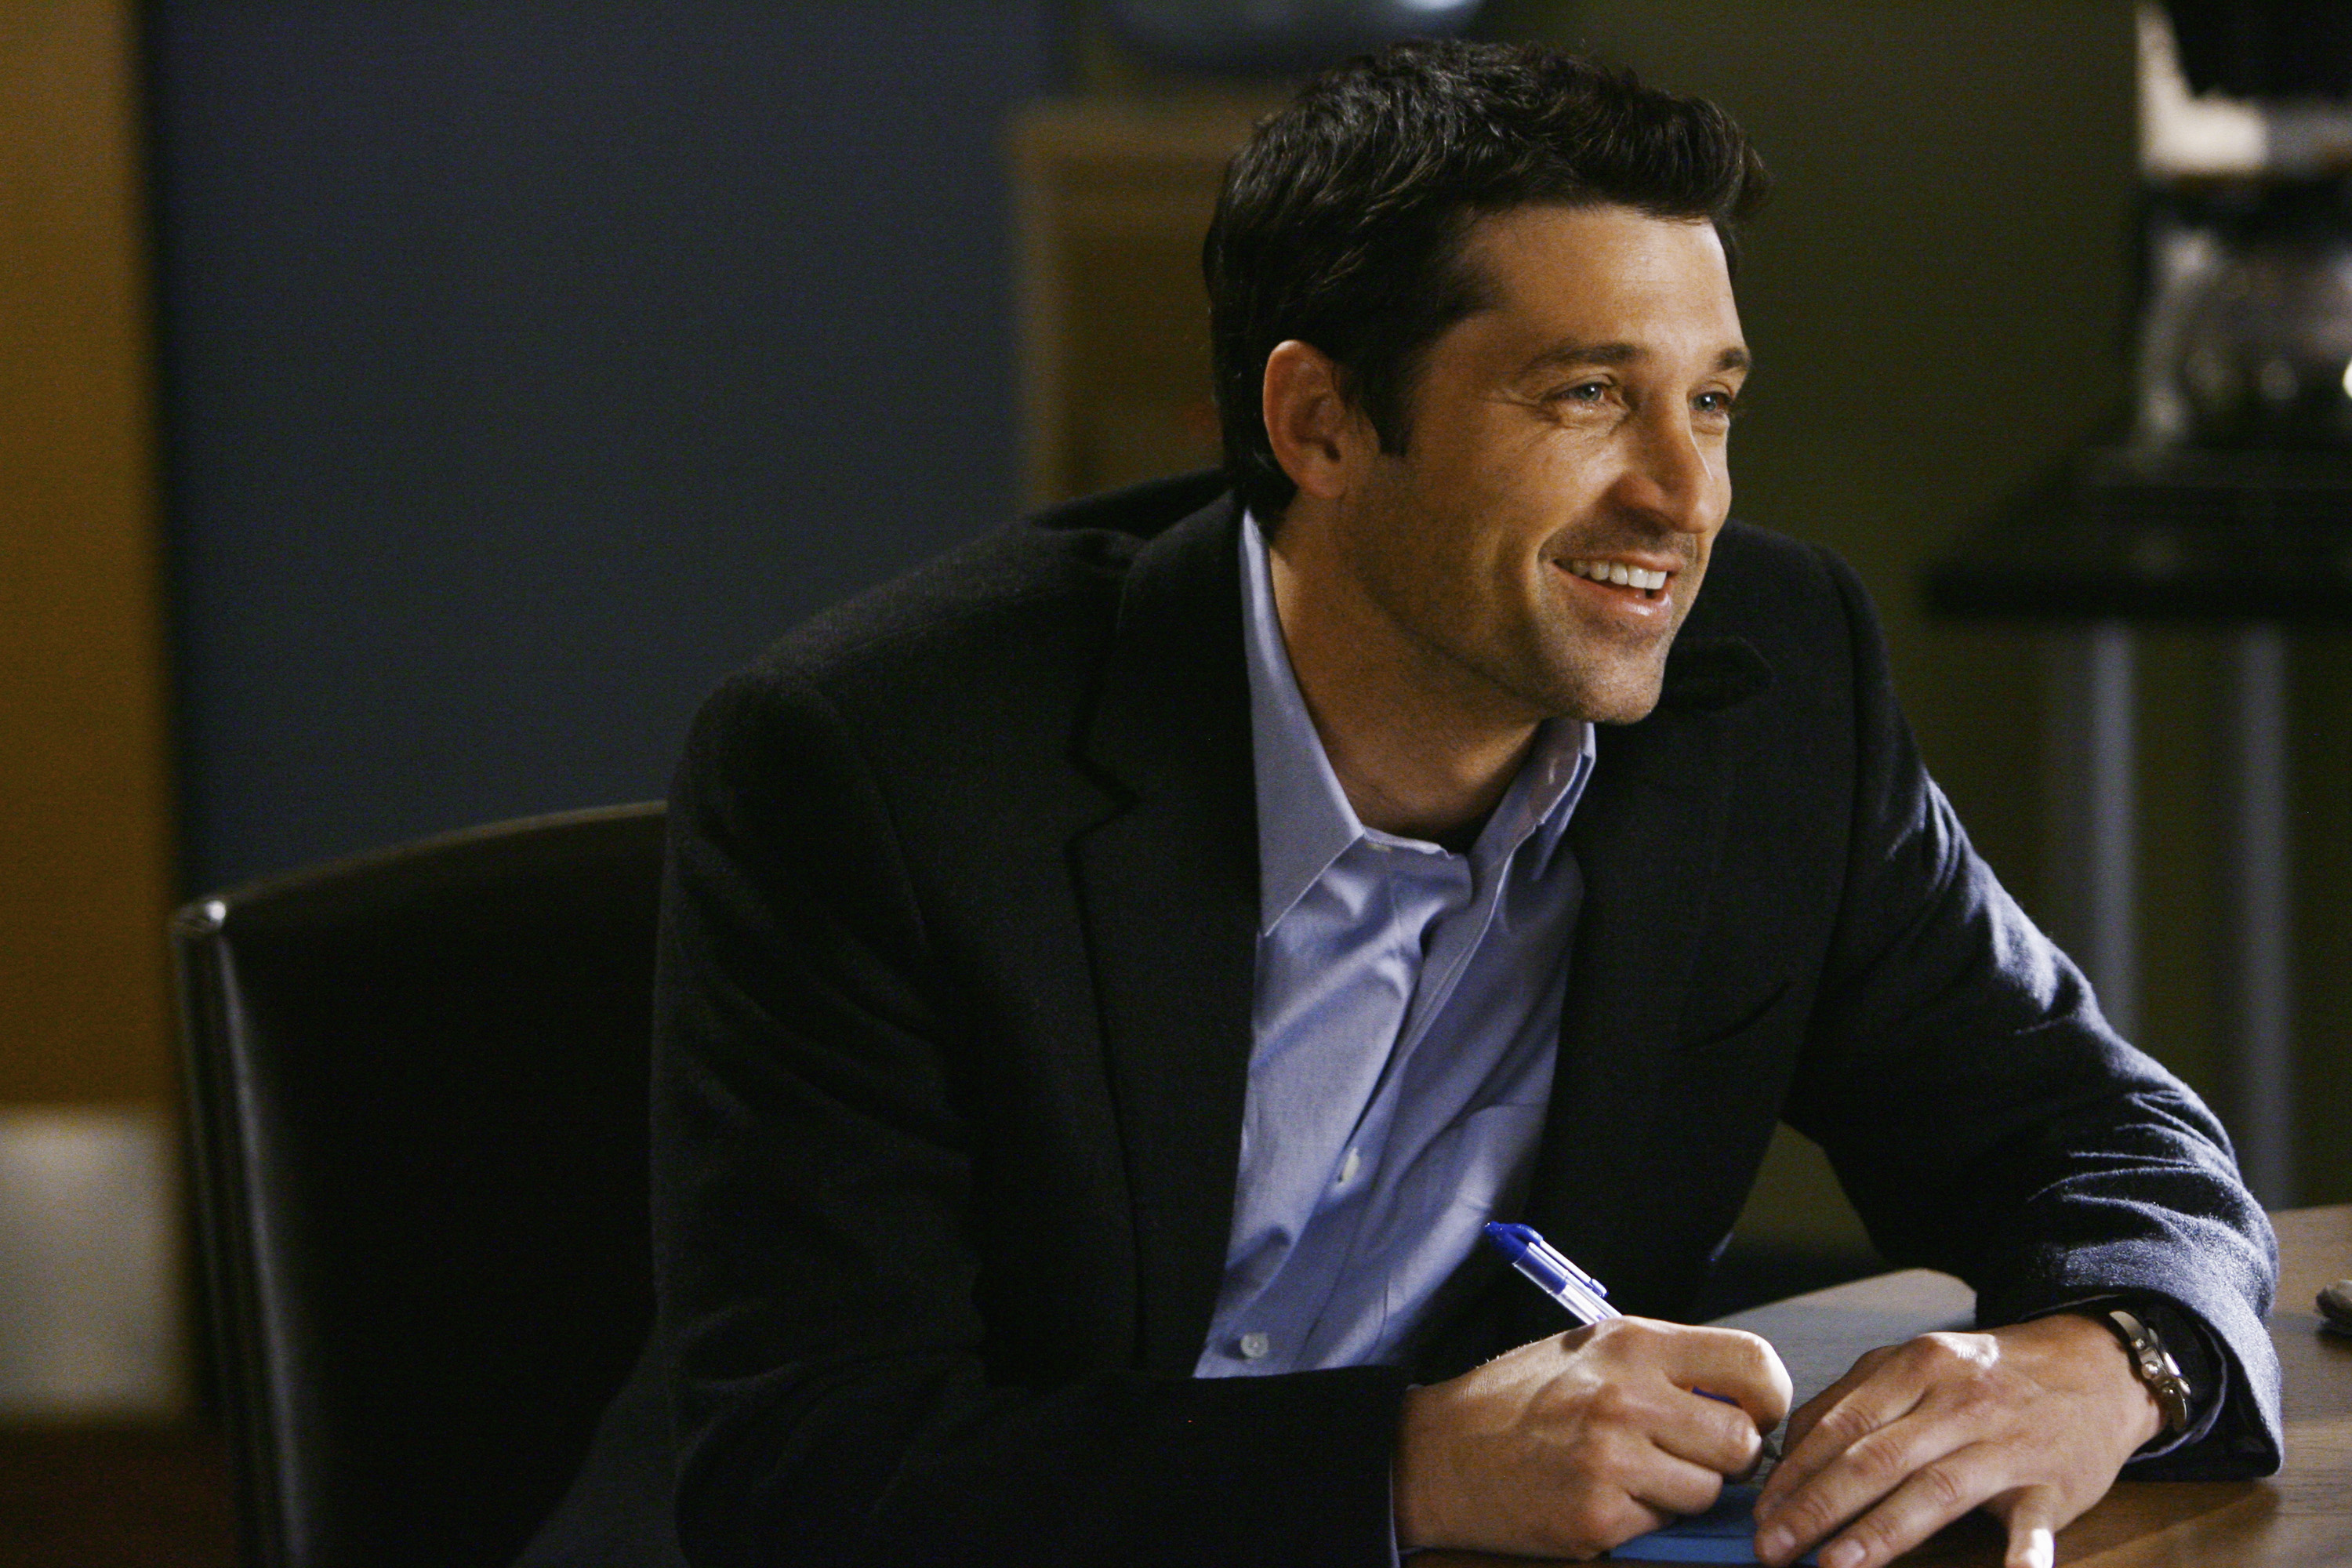 File Photo of Patrick Dempsey as he stars as 